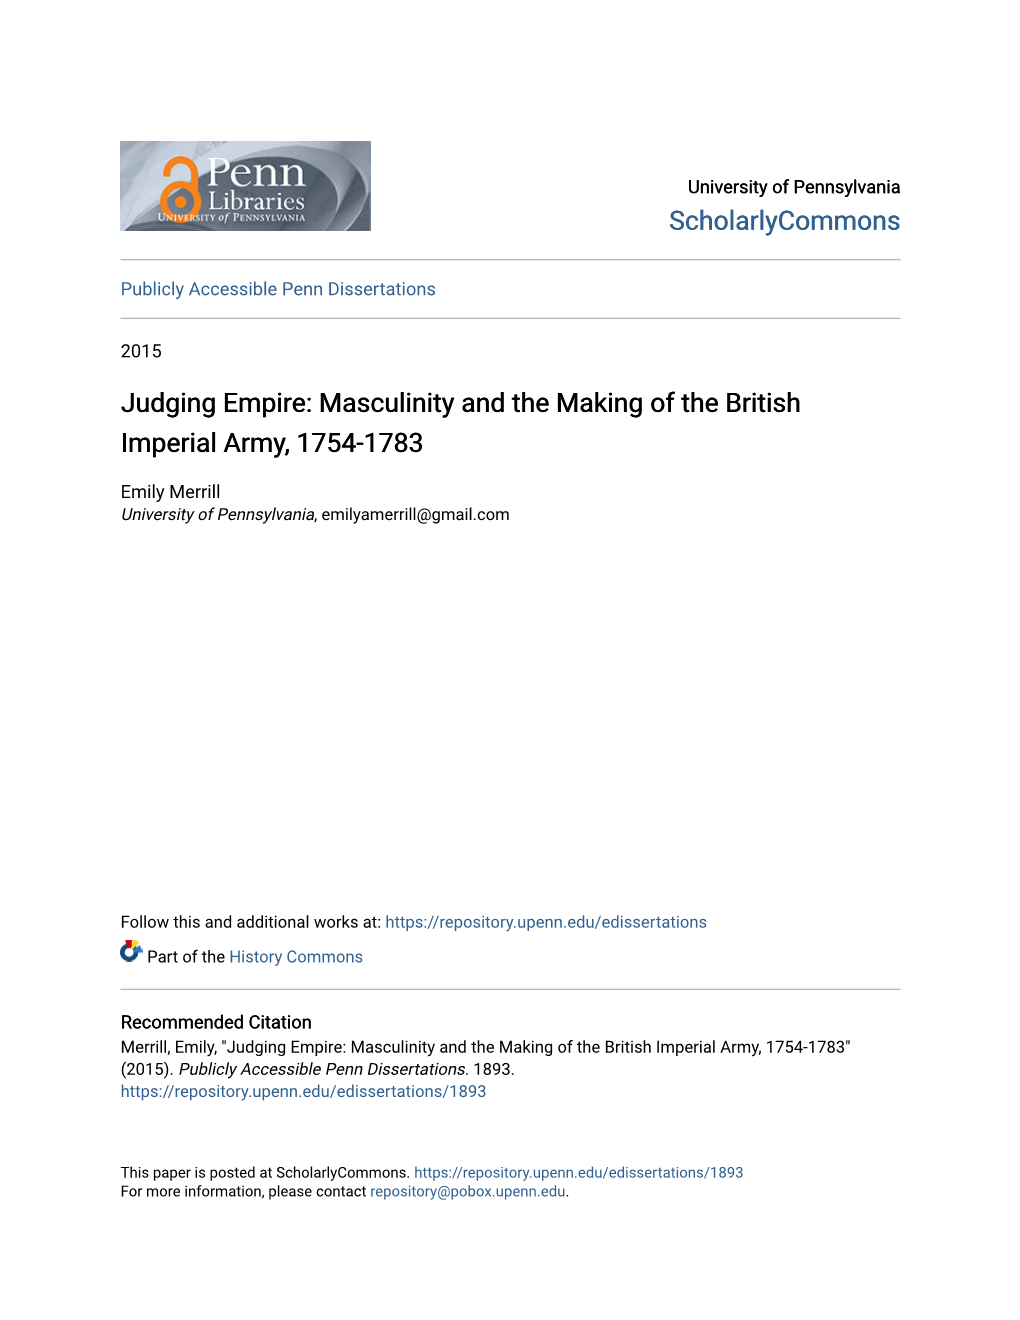 Masculinity and the Making of the British Imperial Army, 1754-1783